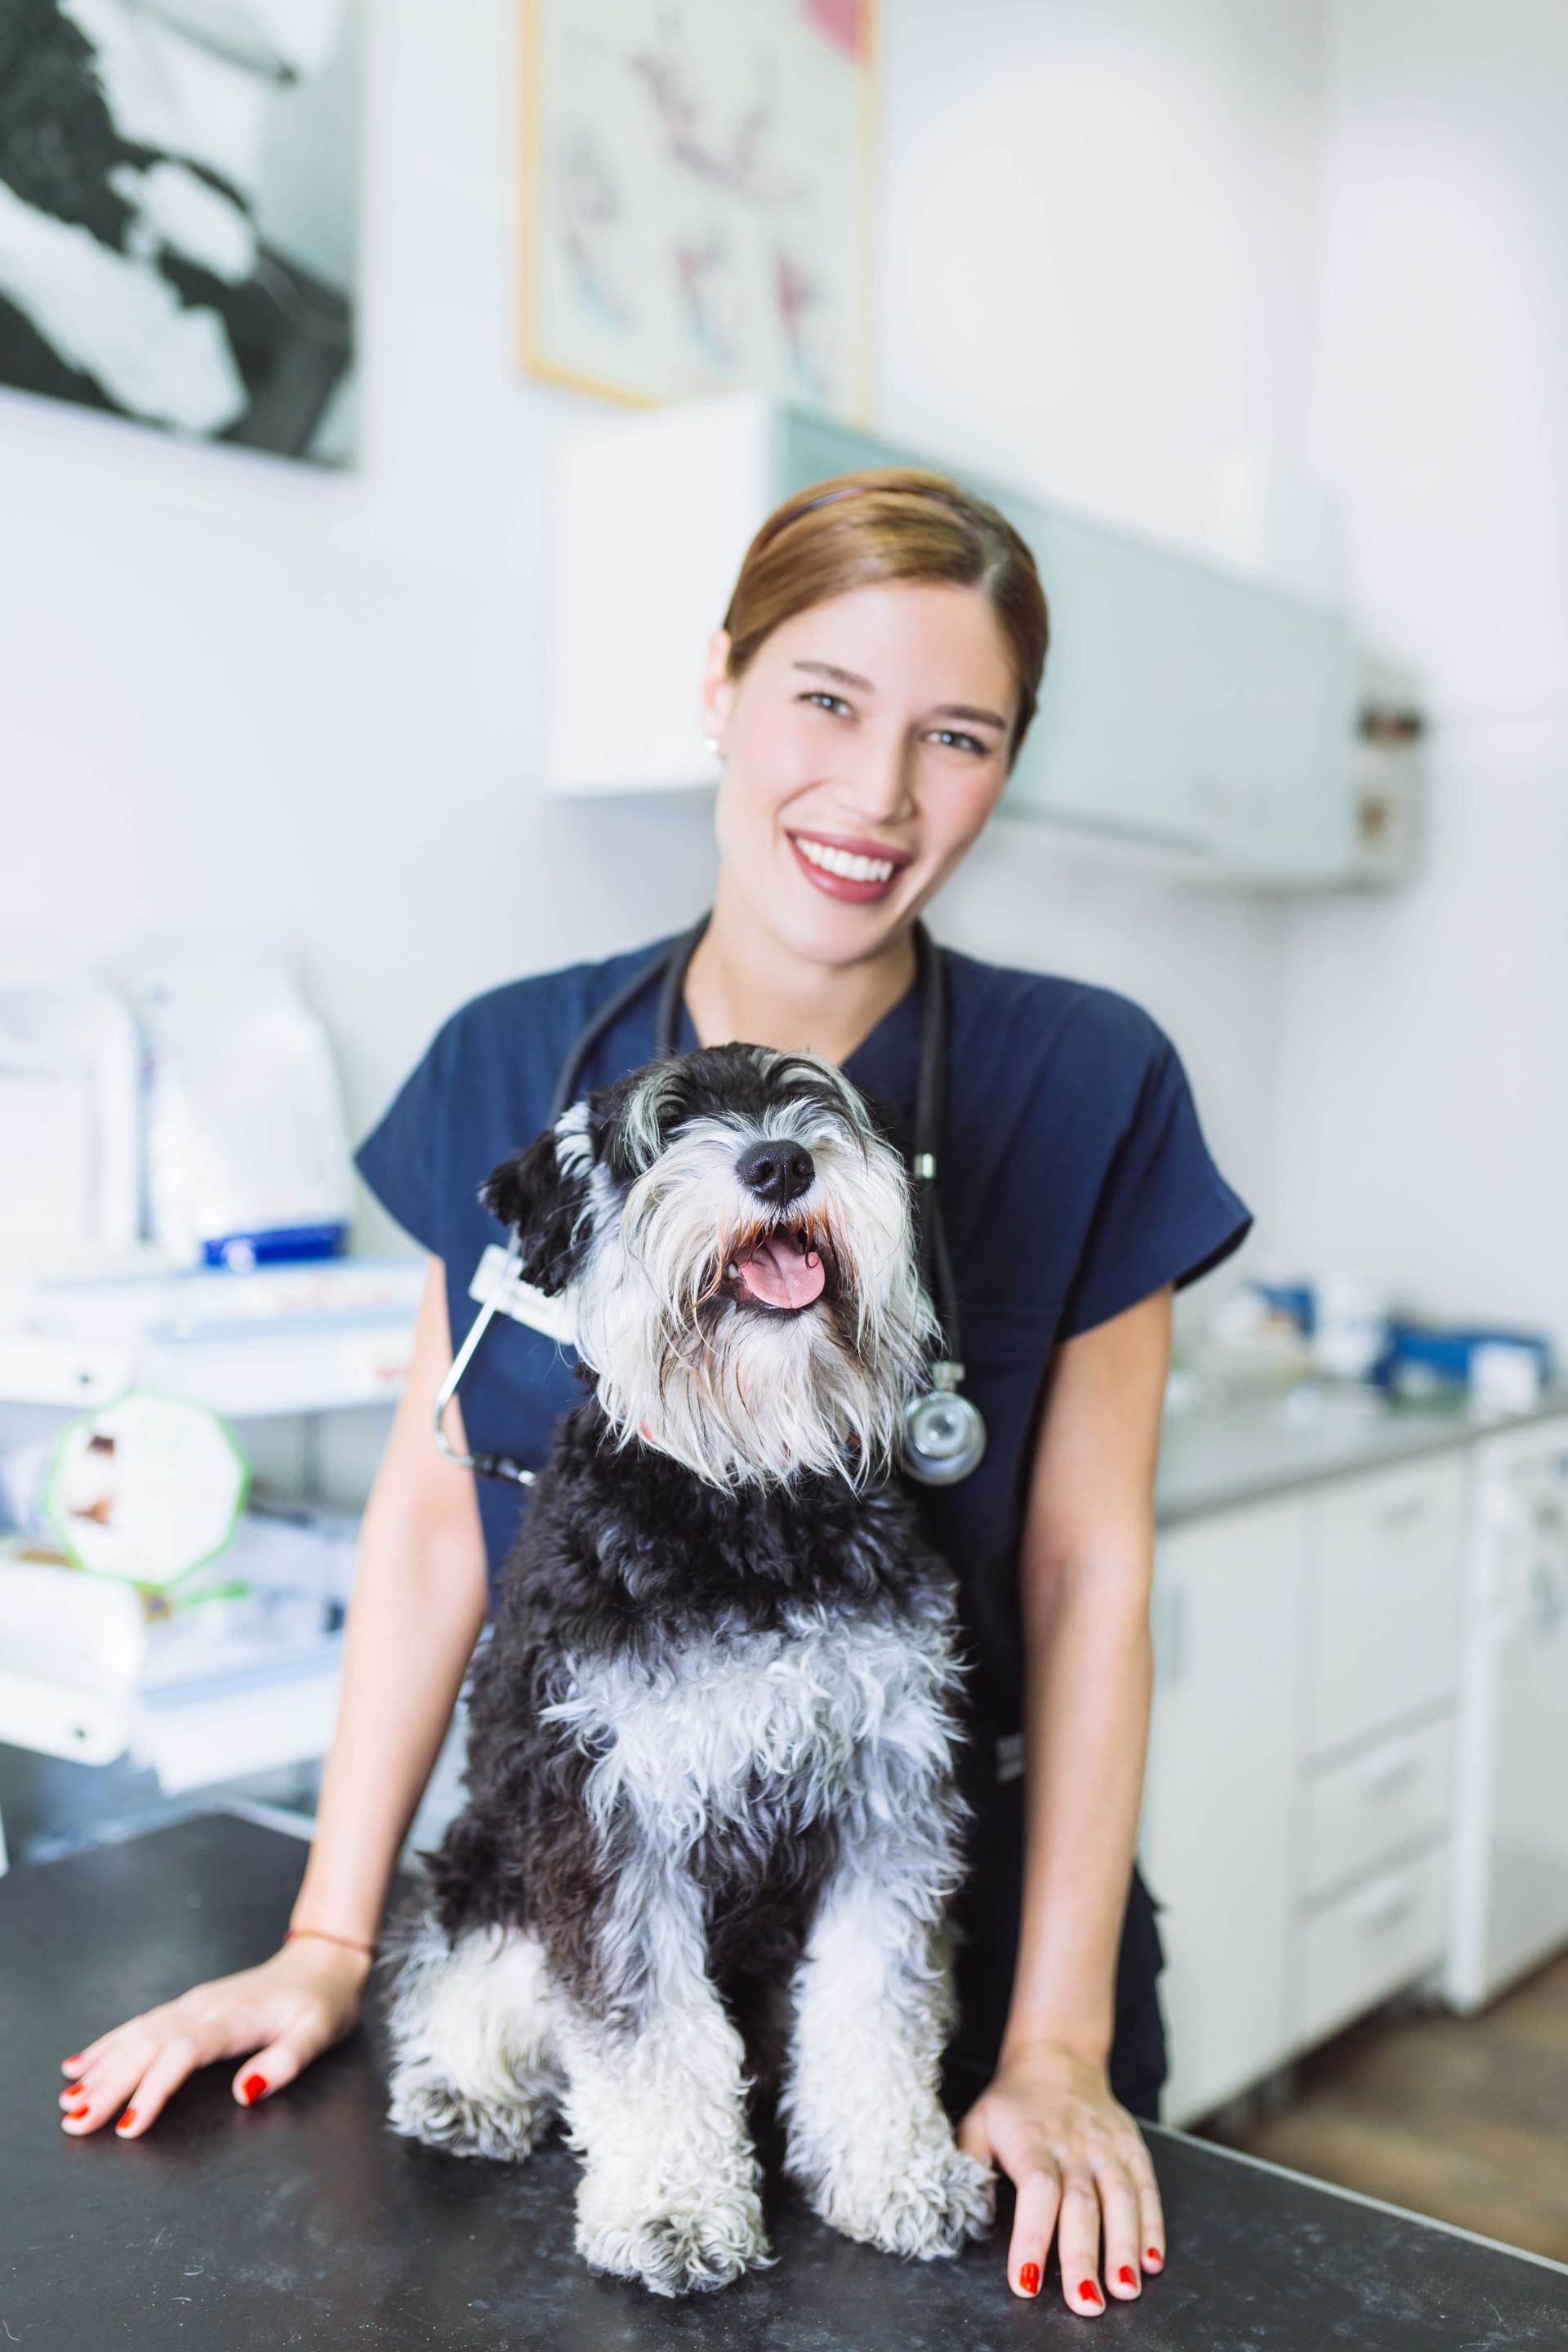 Vet — Lady Veterinarian With A Patient Dog In Westland, MI